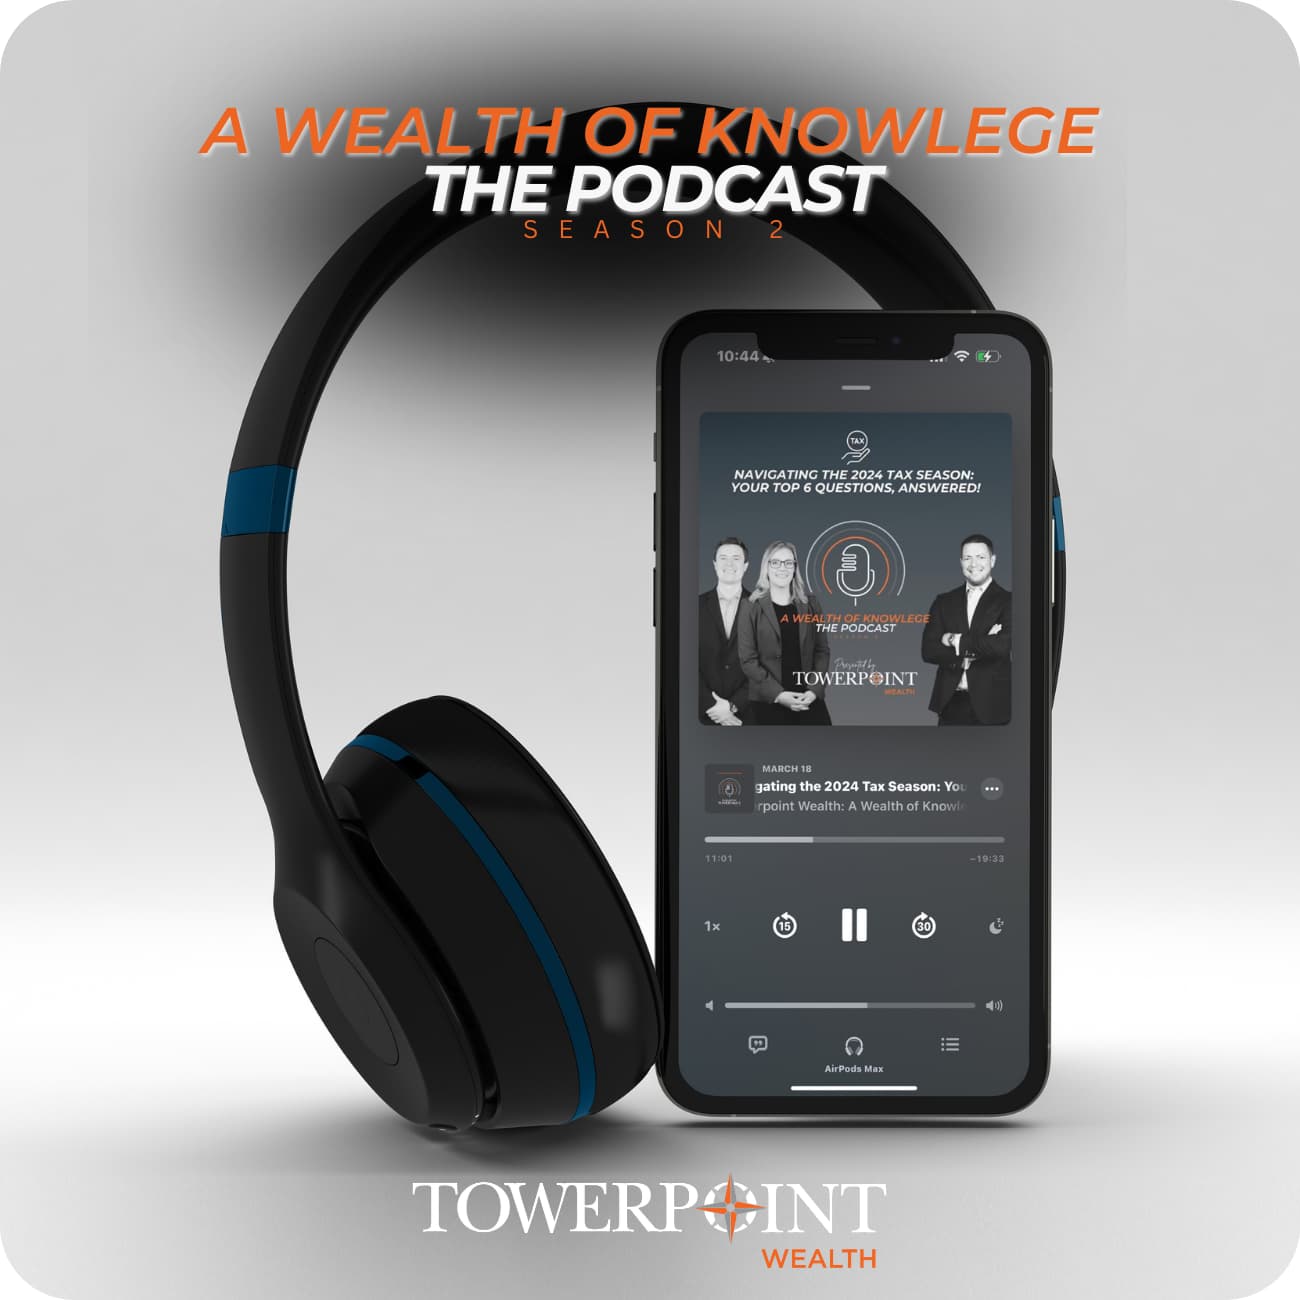 Podcast Advertisment Image